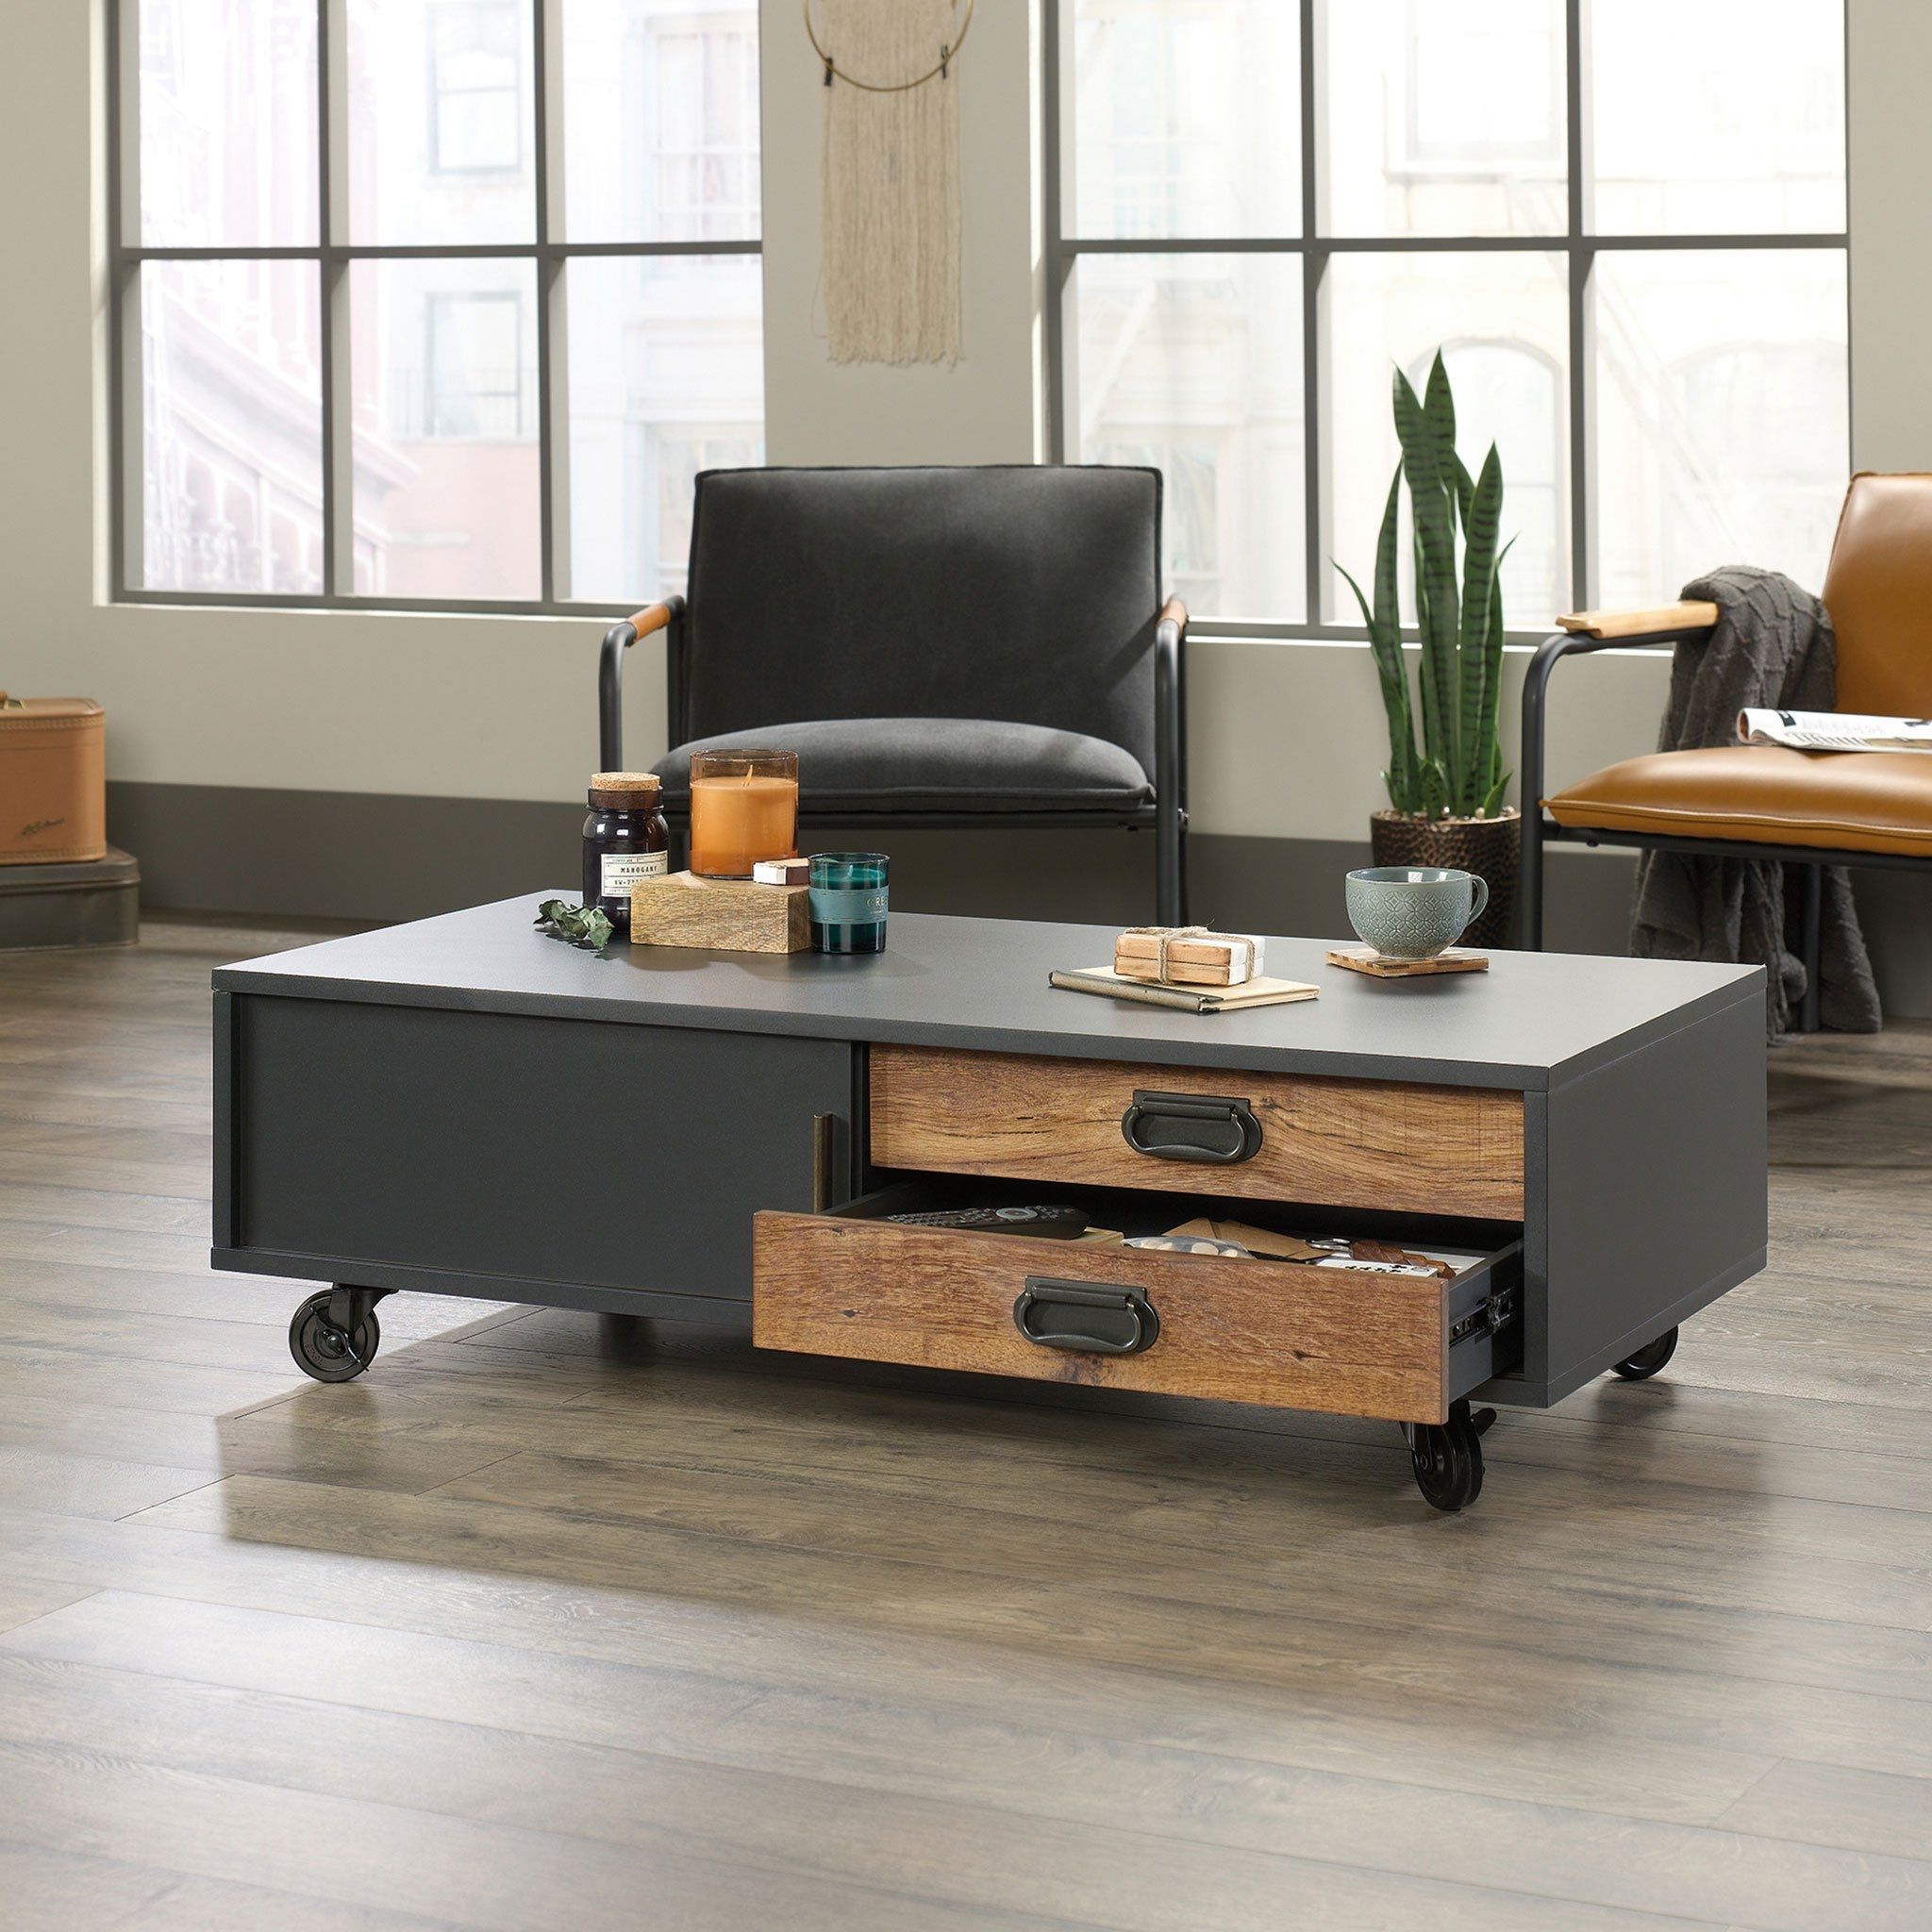 Coffee Table With Wheels – Foter Within Coffee Tables With Casters (View 6 of 15)